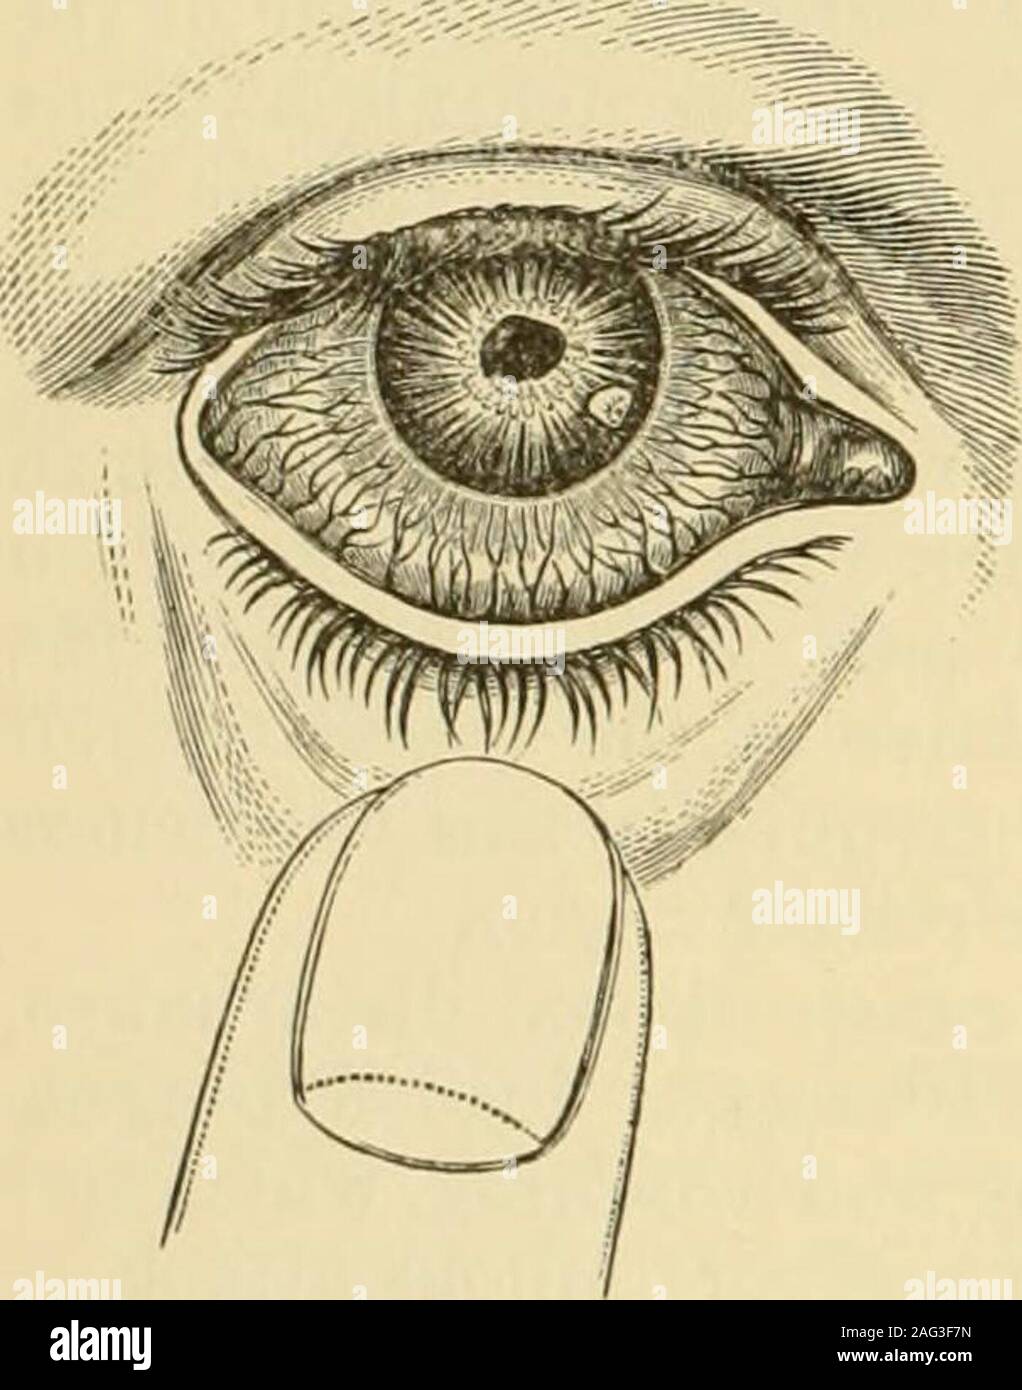 . A treatise on the diseases of the eye. partial, the immobility of the pupil may be the same. In testing themobility of the pupil, the patient should be placed so that the light fallssideways upon the eye. The other must be firmly closed with our hand, orby a handkerchief. The affected eye is to be shaded with the palm of ourhand, which is then to be rapidly removed so as to admit the light, and thebehavior of the pupil accurately watched, so that its size, mobility, and theextent of its contractions may be ascertained. It must be remembered thatcontraction and impaired mobility of the pupil Stock Photo